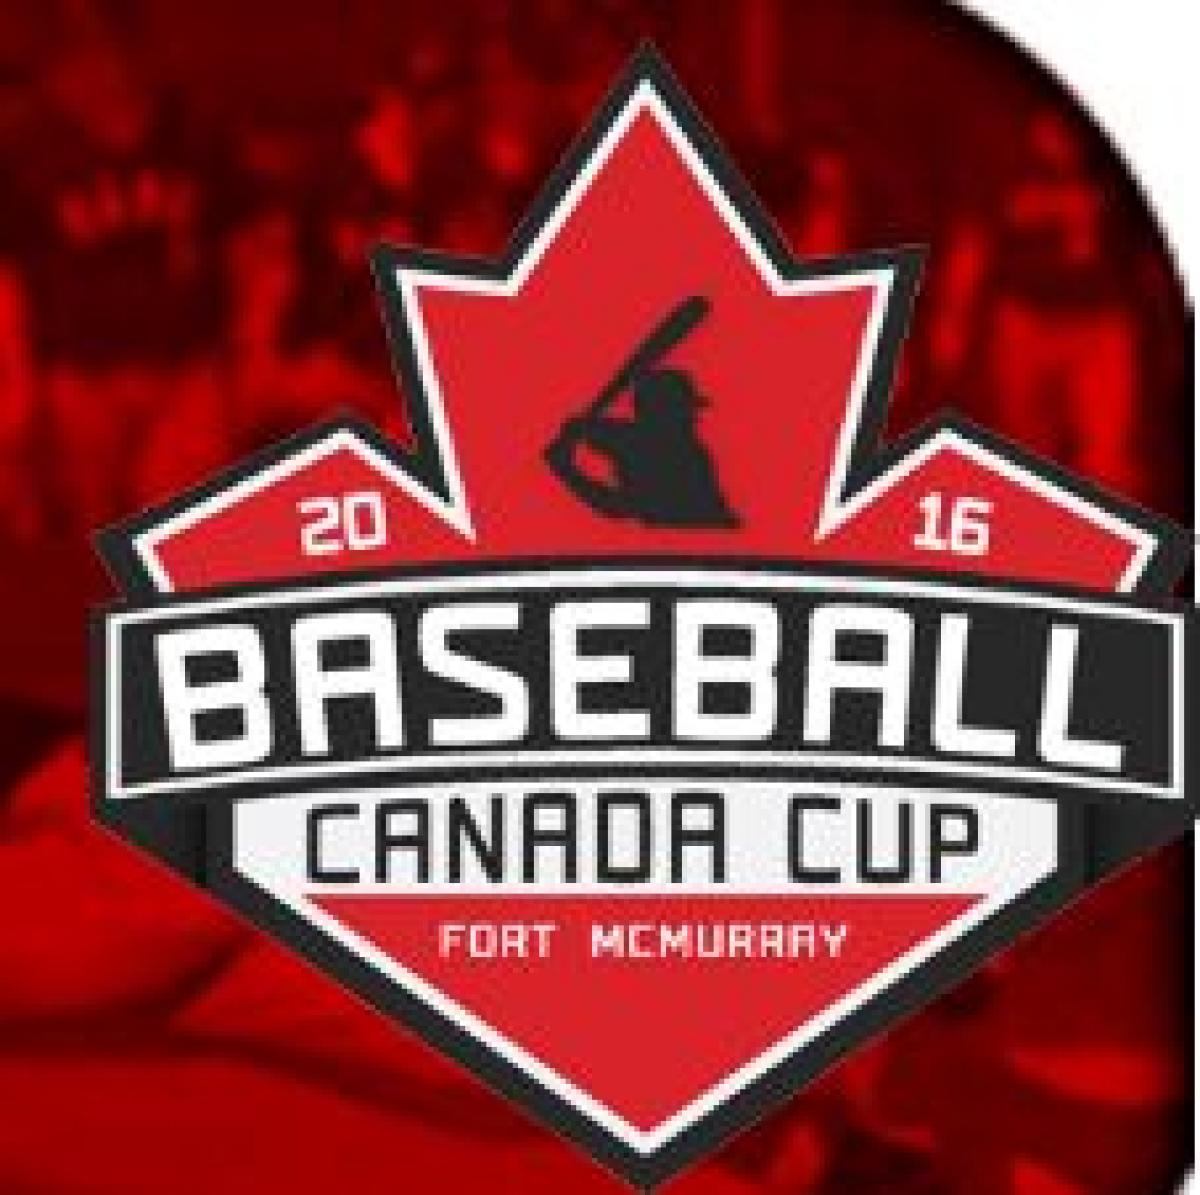 Baseball Canada Cup Day One